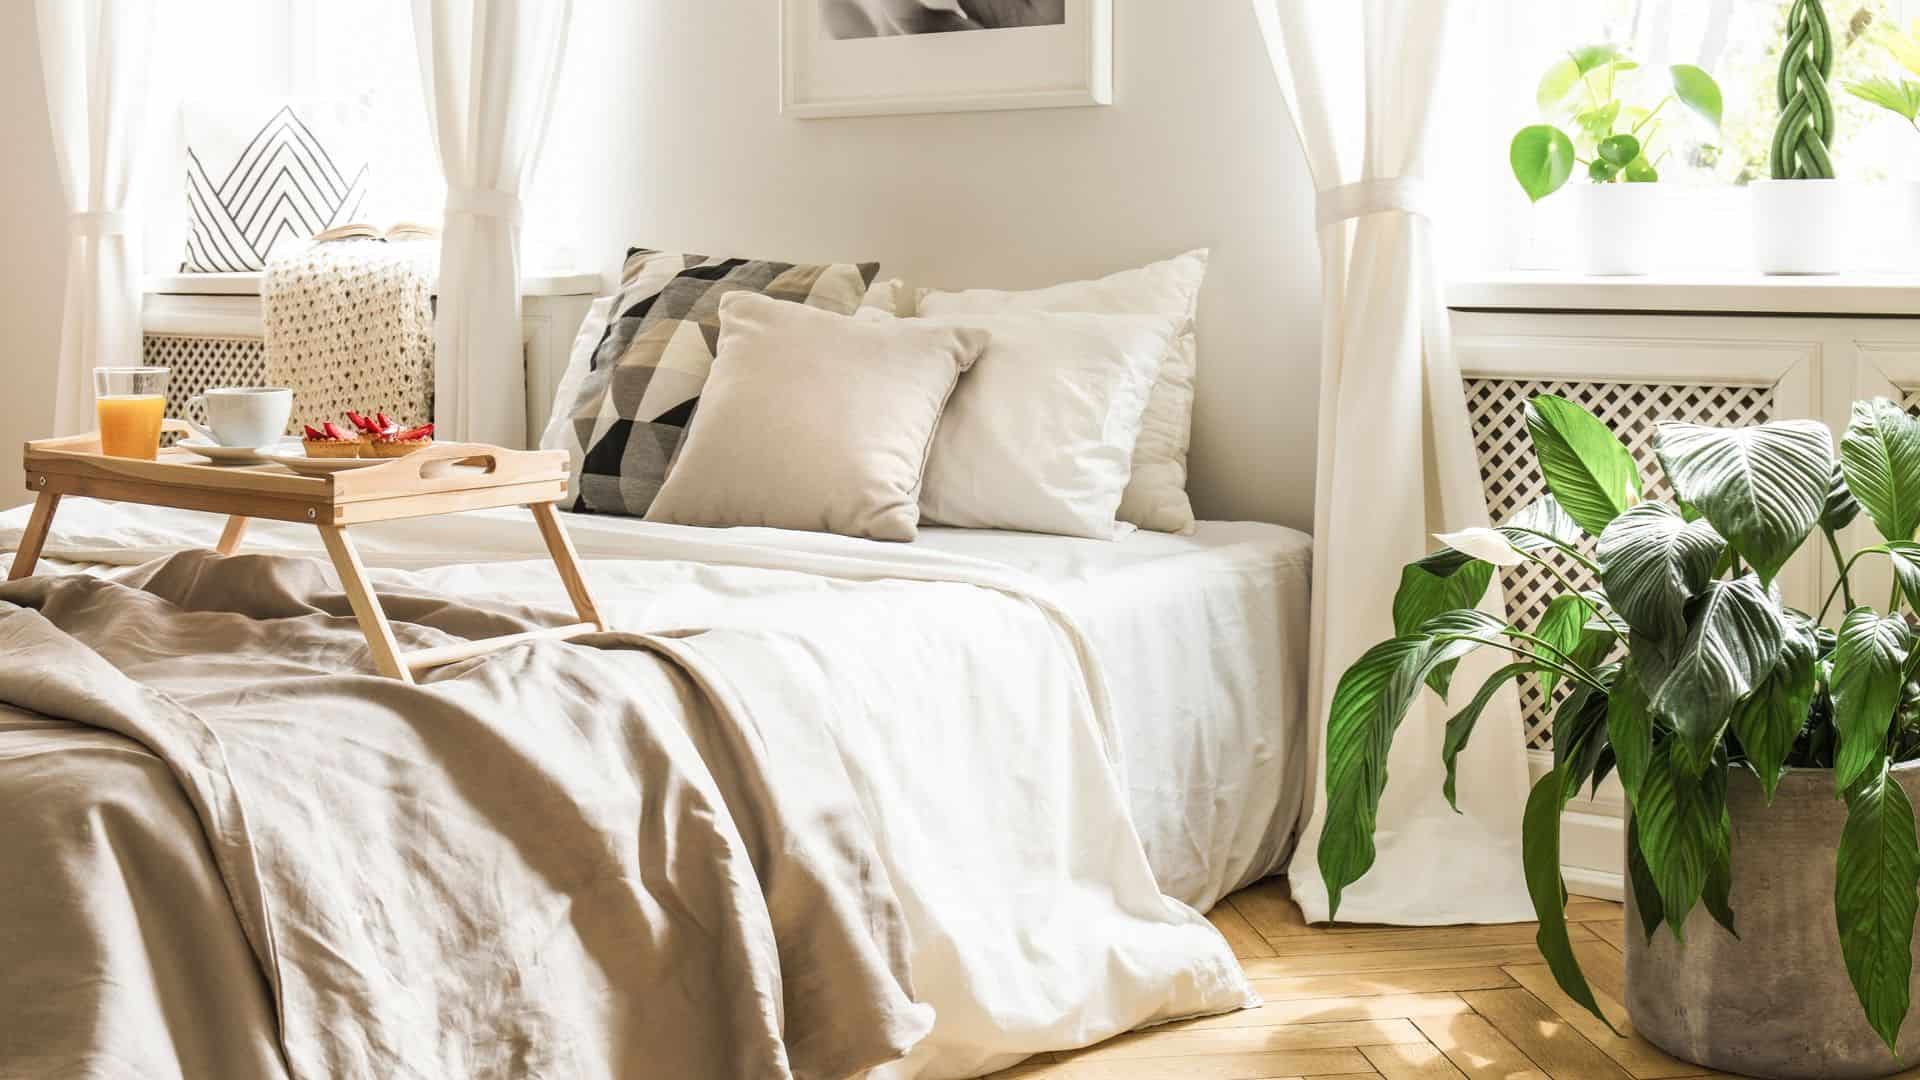 You are currently viewing Guest Room Ideas On a Budget